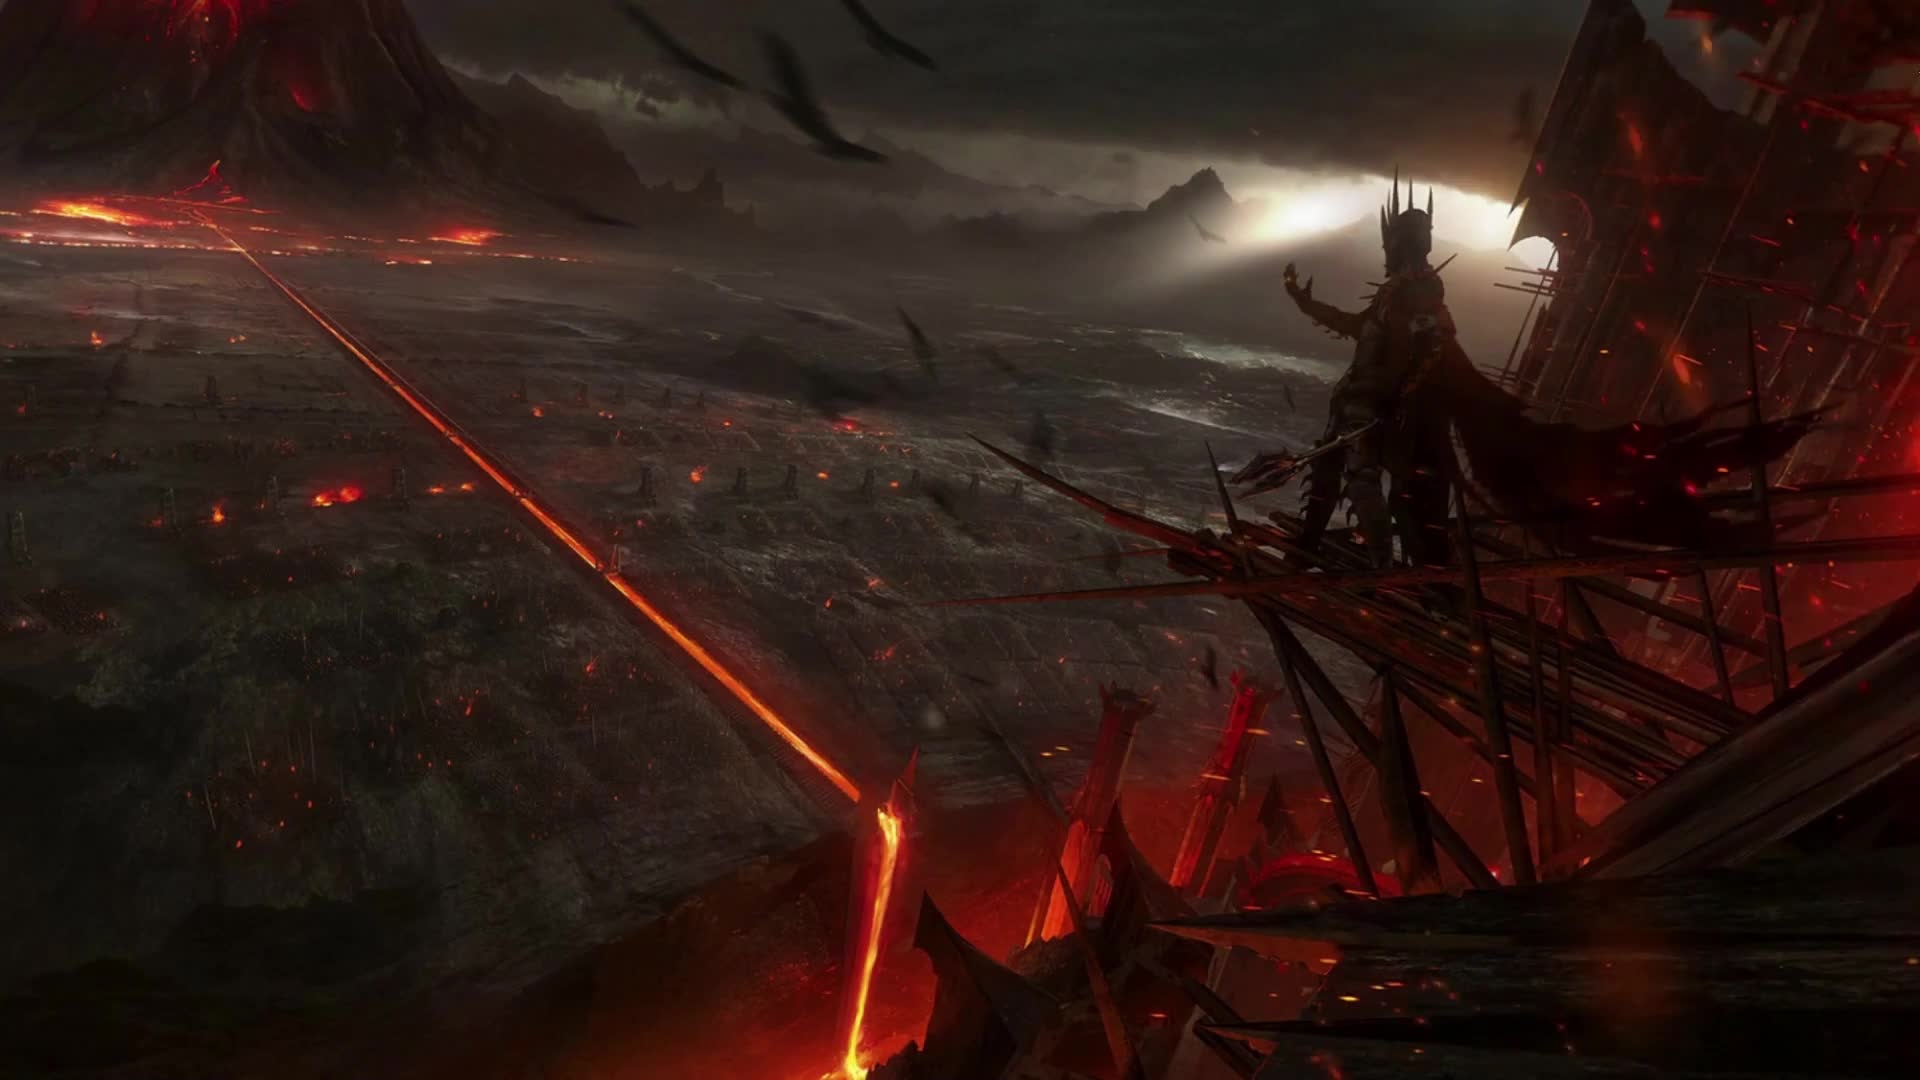 Sauron, Lord of the Rings game, Live desktop wallpapers, 1920x1080 Full HD Desktop